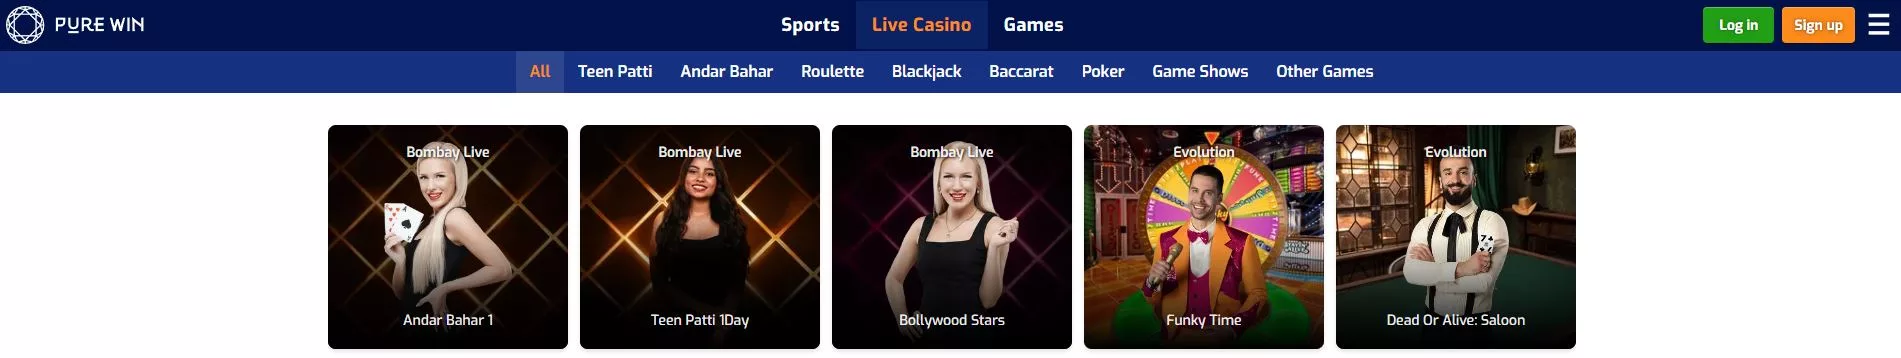 live casino offers at purewin